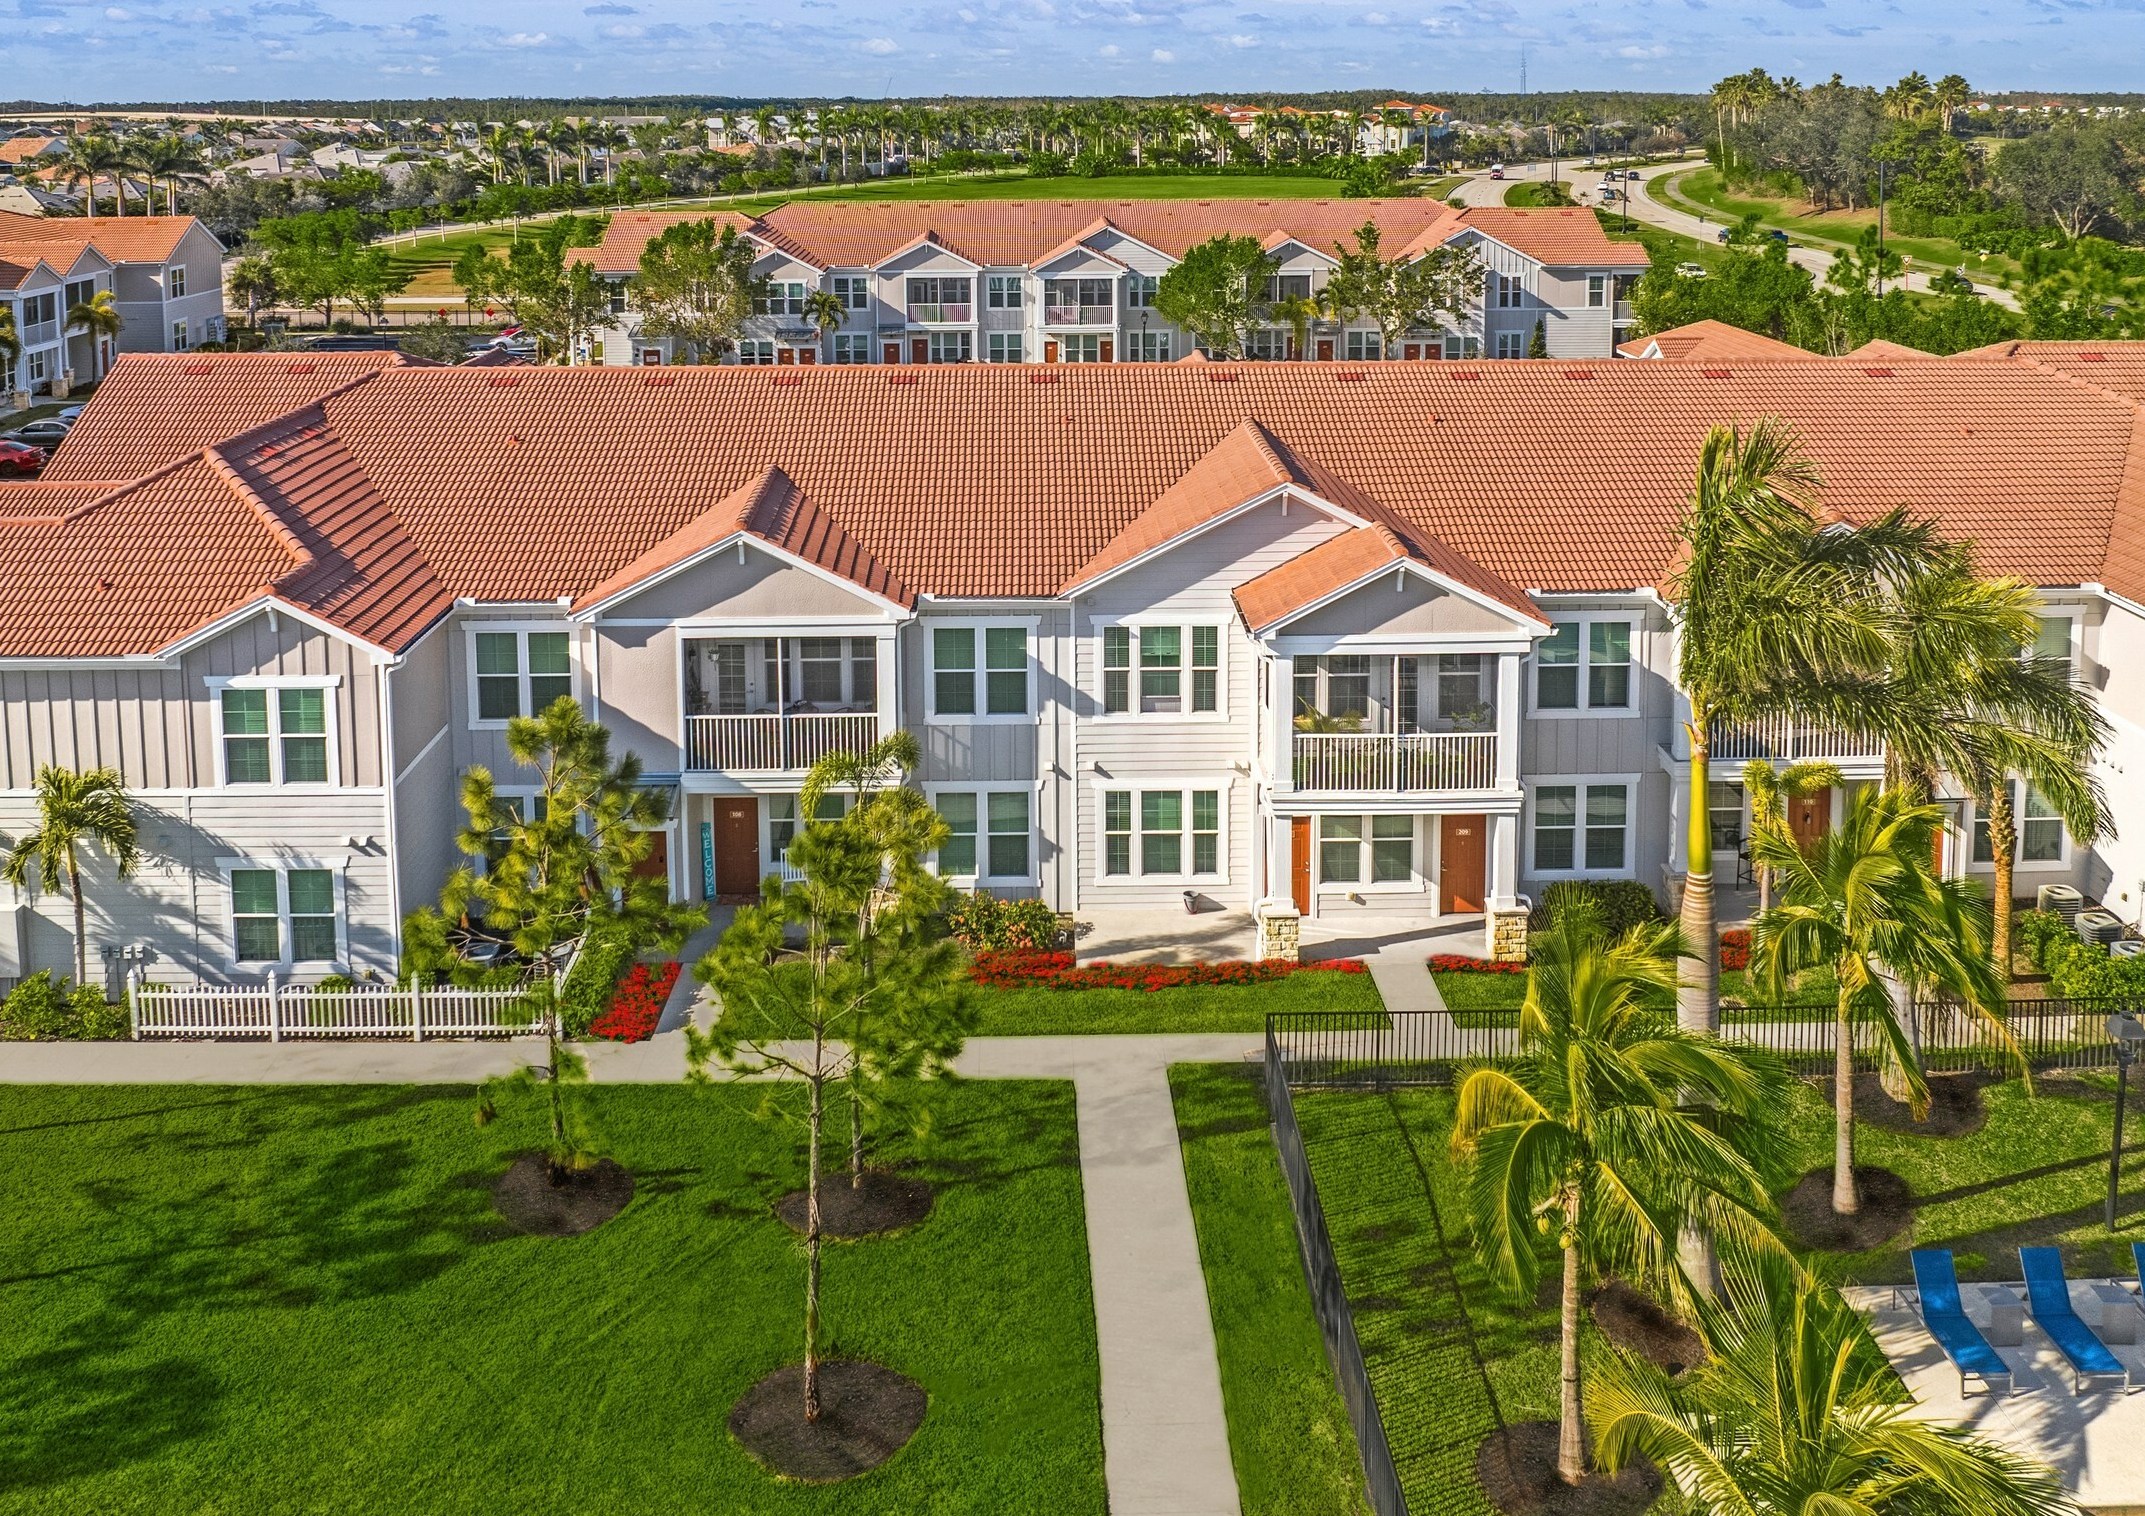 ECI Group Completes Acquisition of 260-Unit Longitude 81 Apartment Community in Fast Growing Southwest Florida Market of Estero